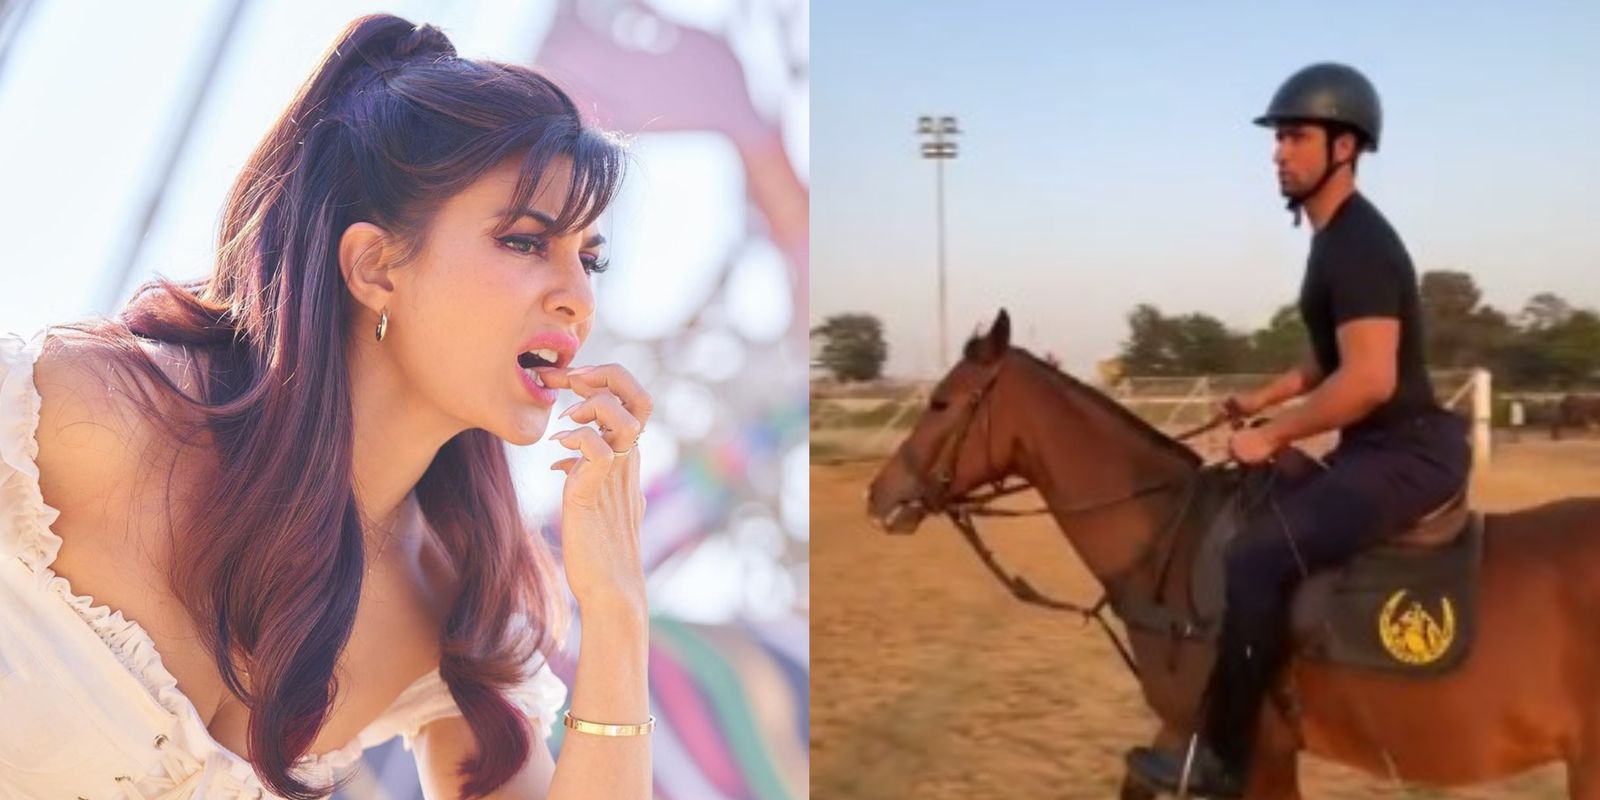 Jacqueline Fernandez Reveals Her First Look From Bachchan Pandey; Vicky Kaushal Returns To Horse Riding